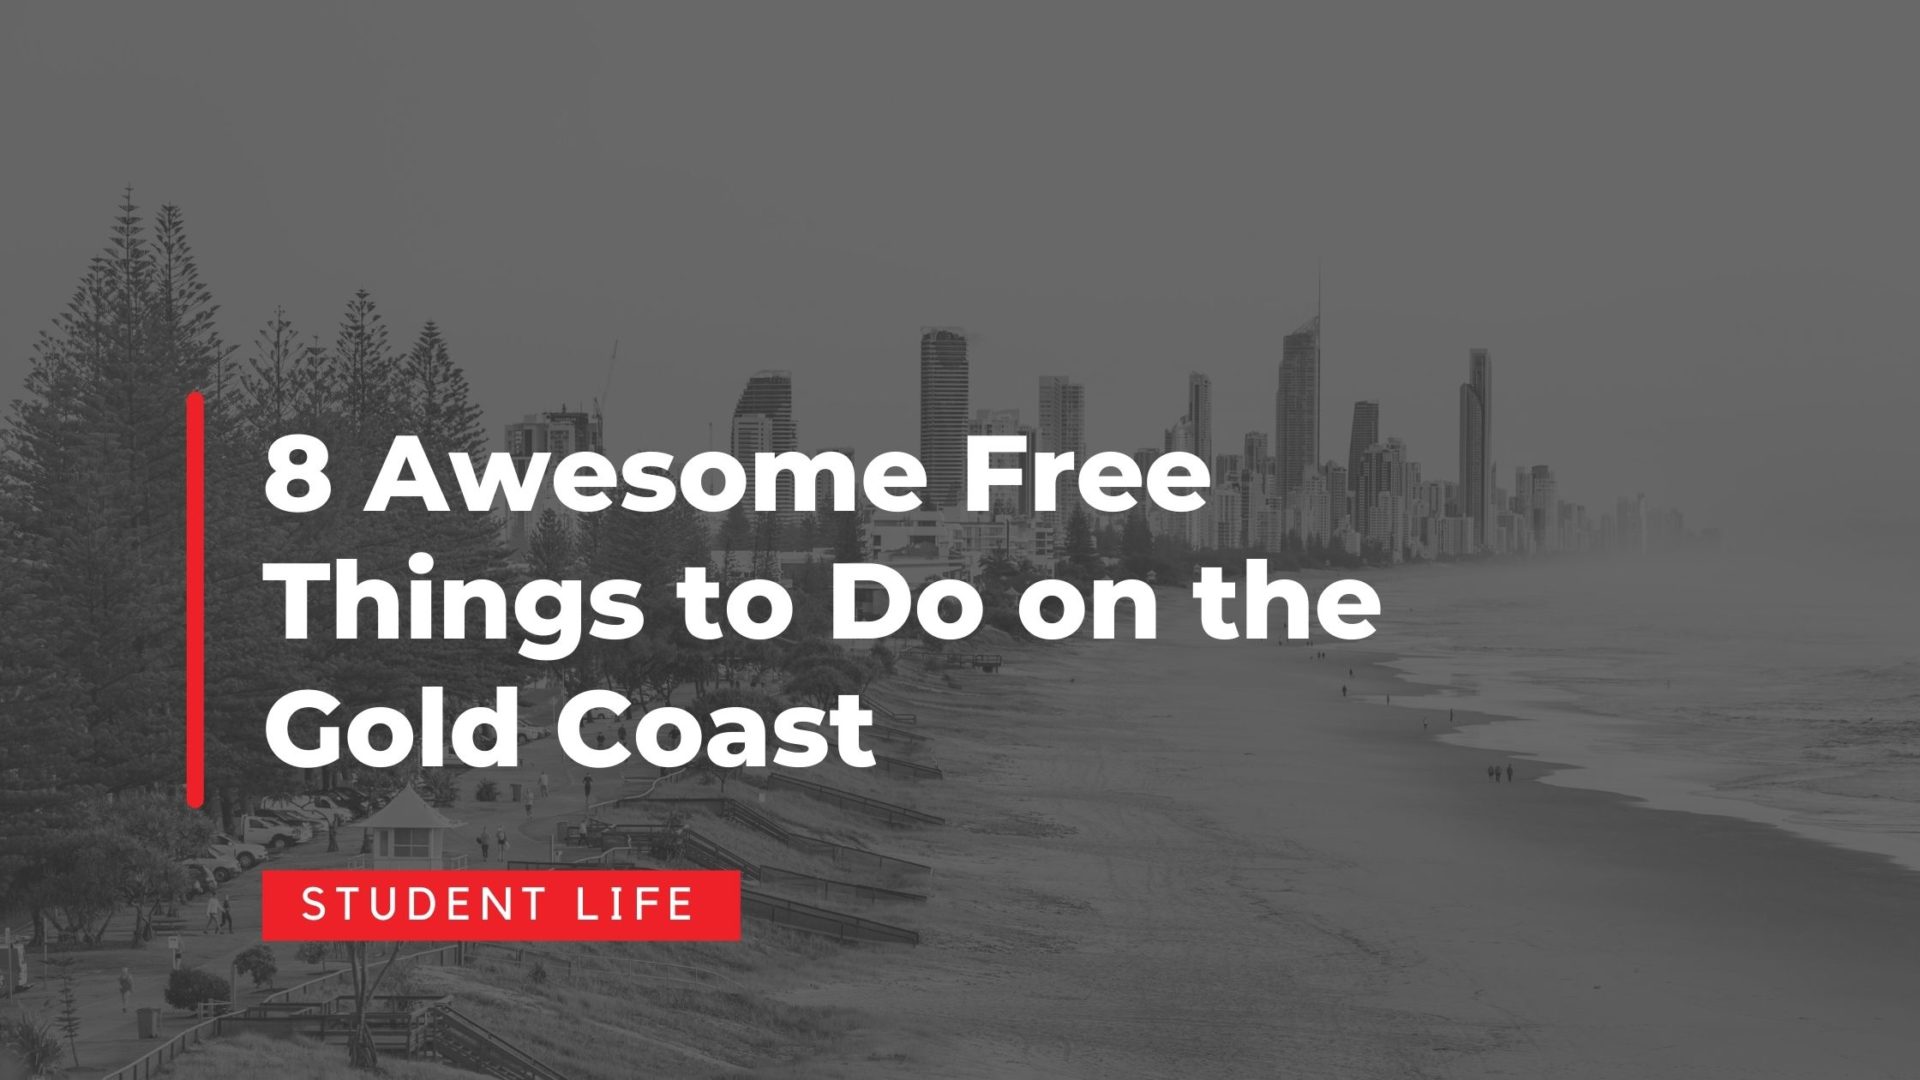 8 Awesome Free Things to Do on the Gold Coast